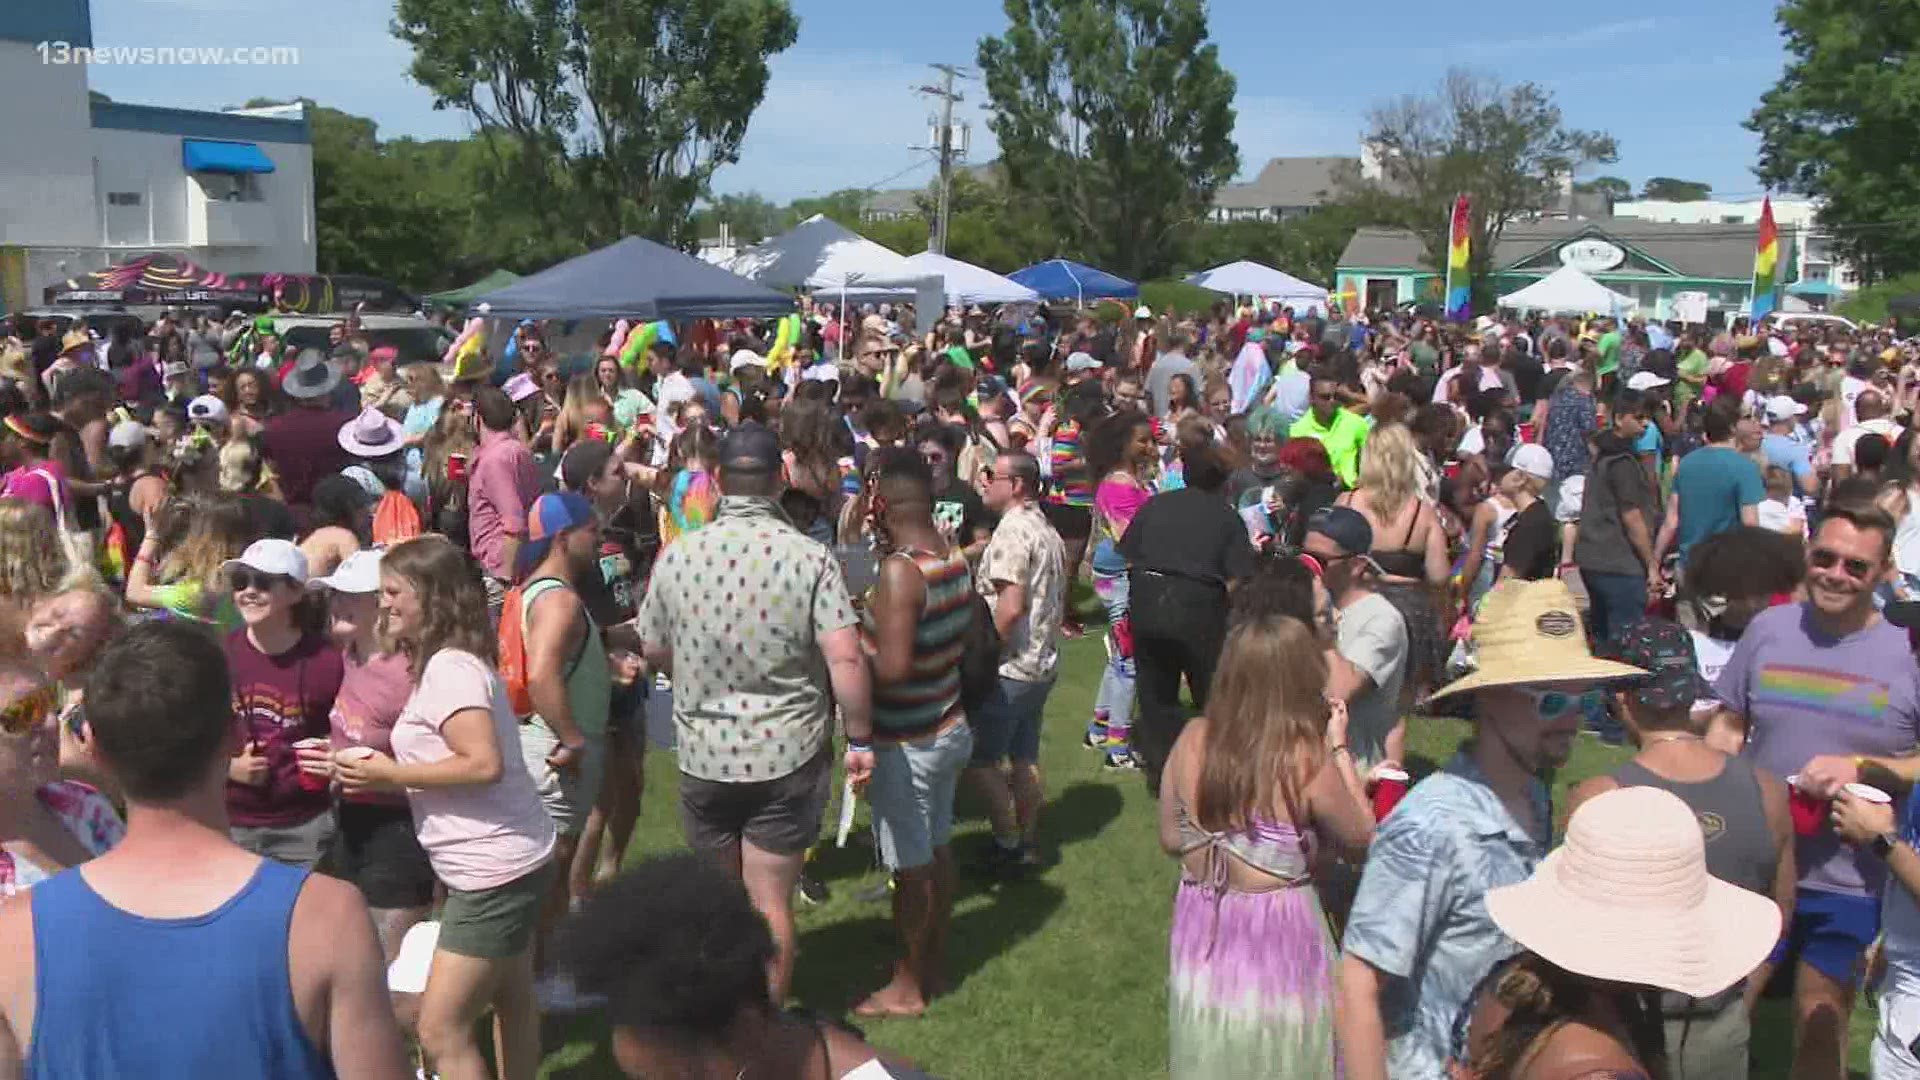 Family and friends of all ages were welcome to attend the 'PRIDE in the ViBe' event. It is in honor of PRIDE month, and multiple vendors were in attendance.